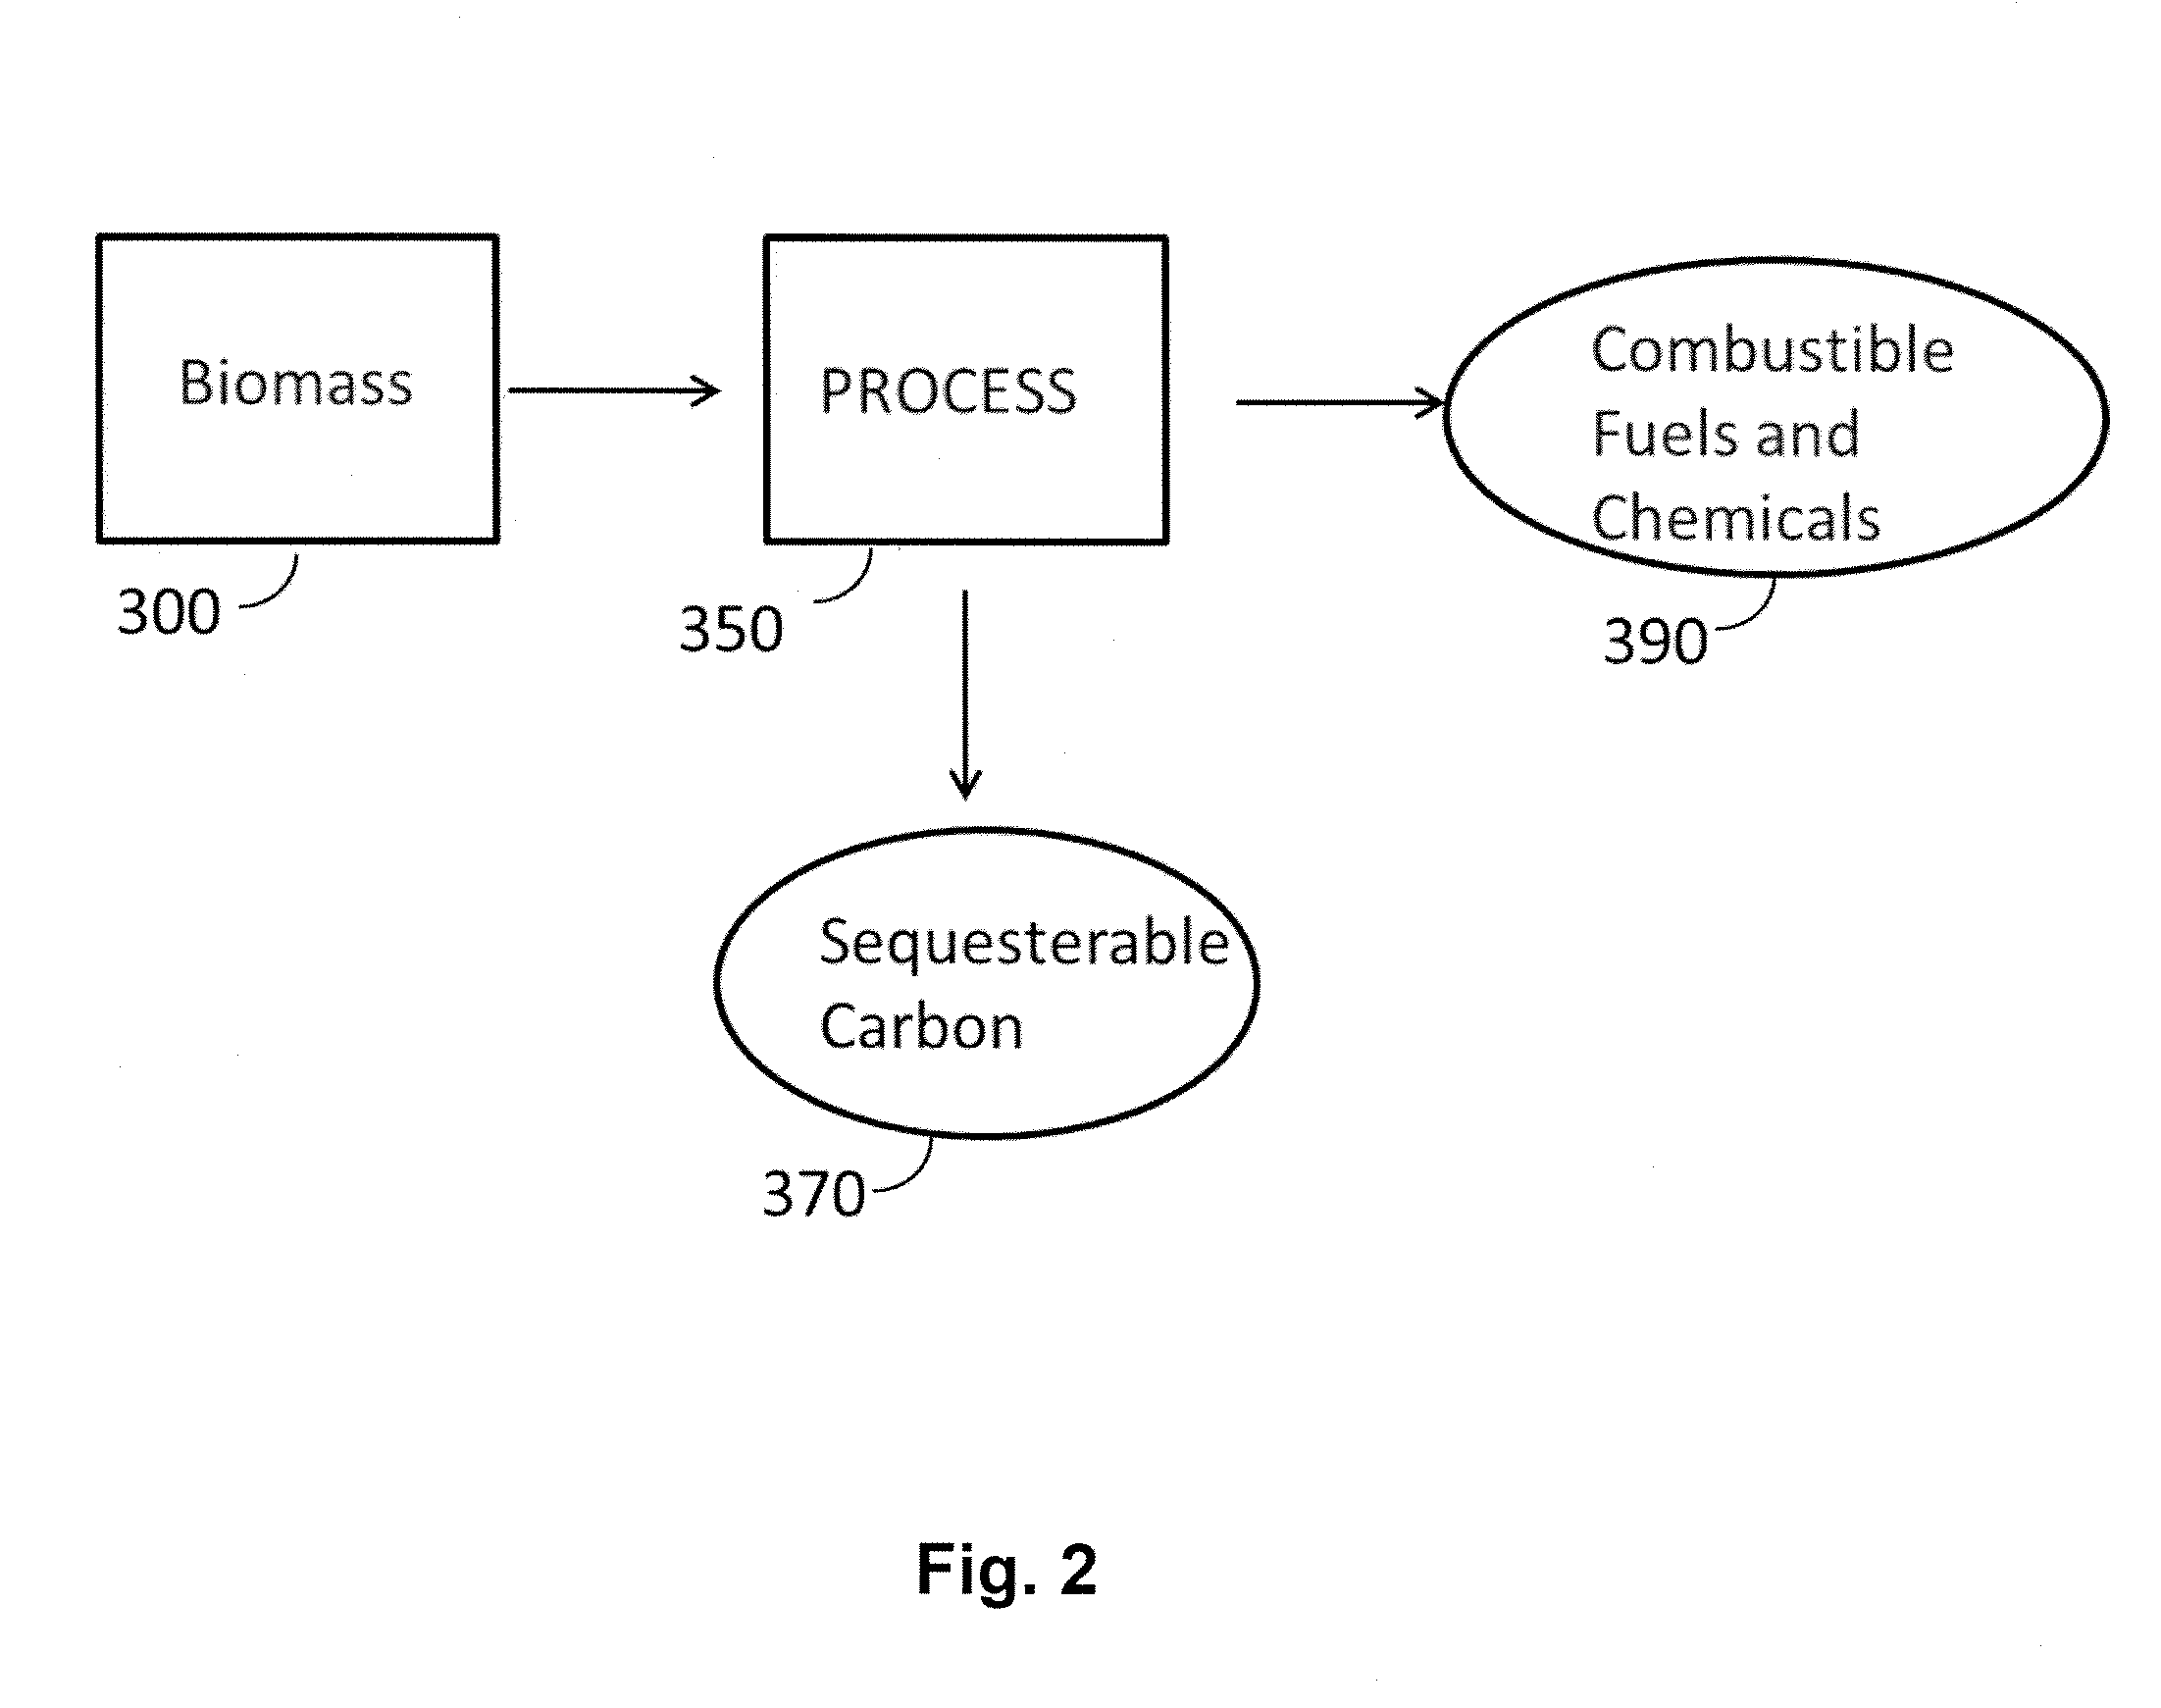 Method for producing negative carbon fuel